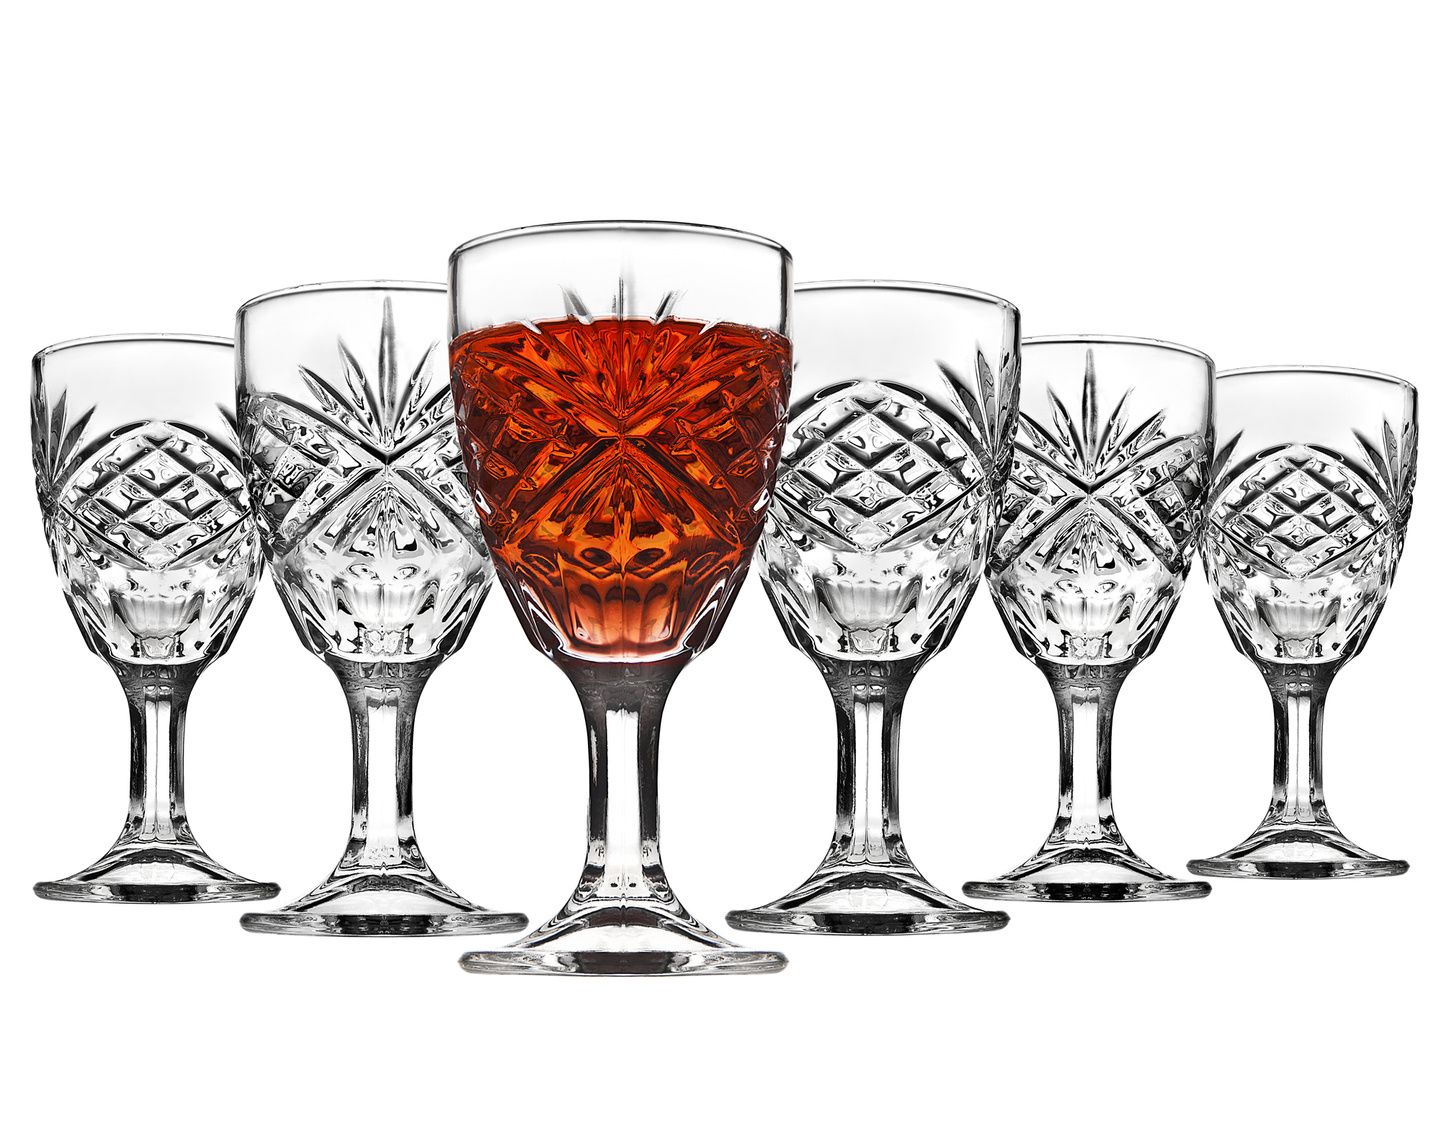 https://cdn11.bigcommerce.com/s-9mnzpxwffi/images/stencil/original/products/391/2208/Small_Crystal_Stem_Liqueur_Cordial_Glasses_Set_of_6__64348.1598232315.jpg?c=2